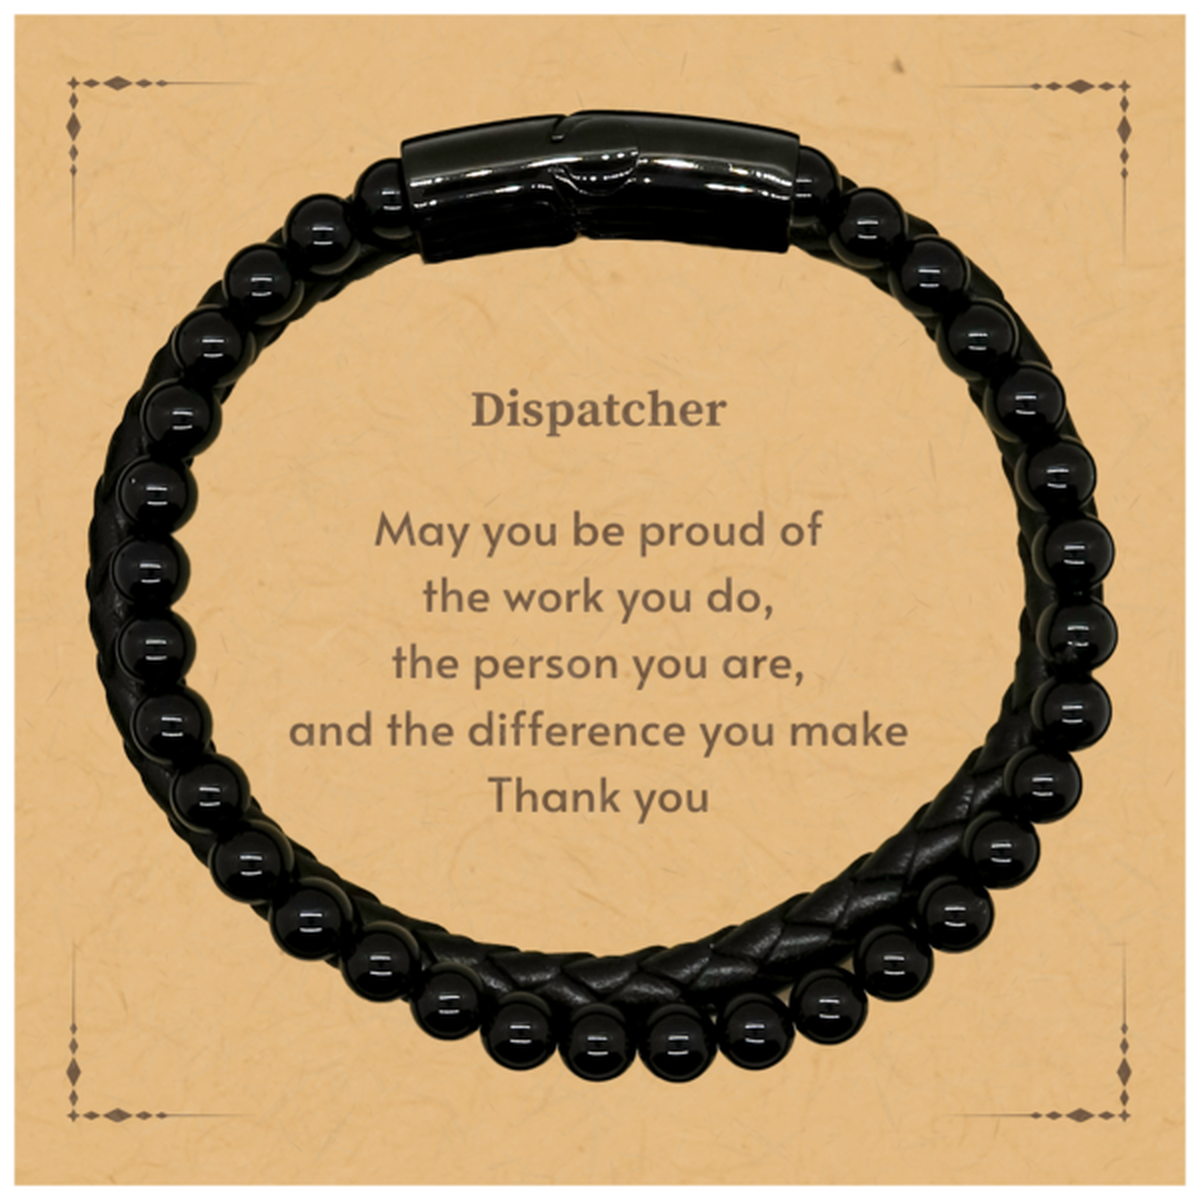 Heartwarming Stone Leather Bracelets Retirement Coworkers Gifts for Dispatcher, Dispatcher May You be proud of the work you do, the person you are Gifts for Boss Men Women Friends